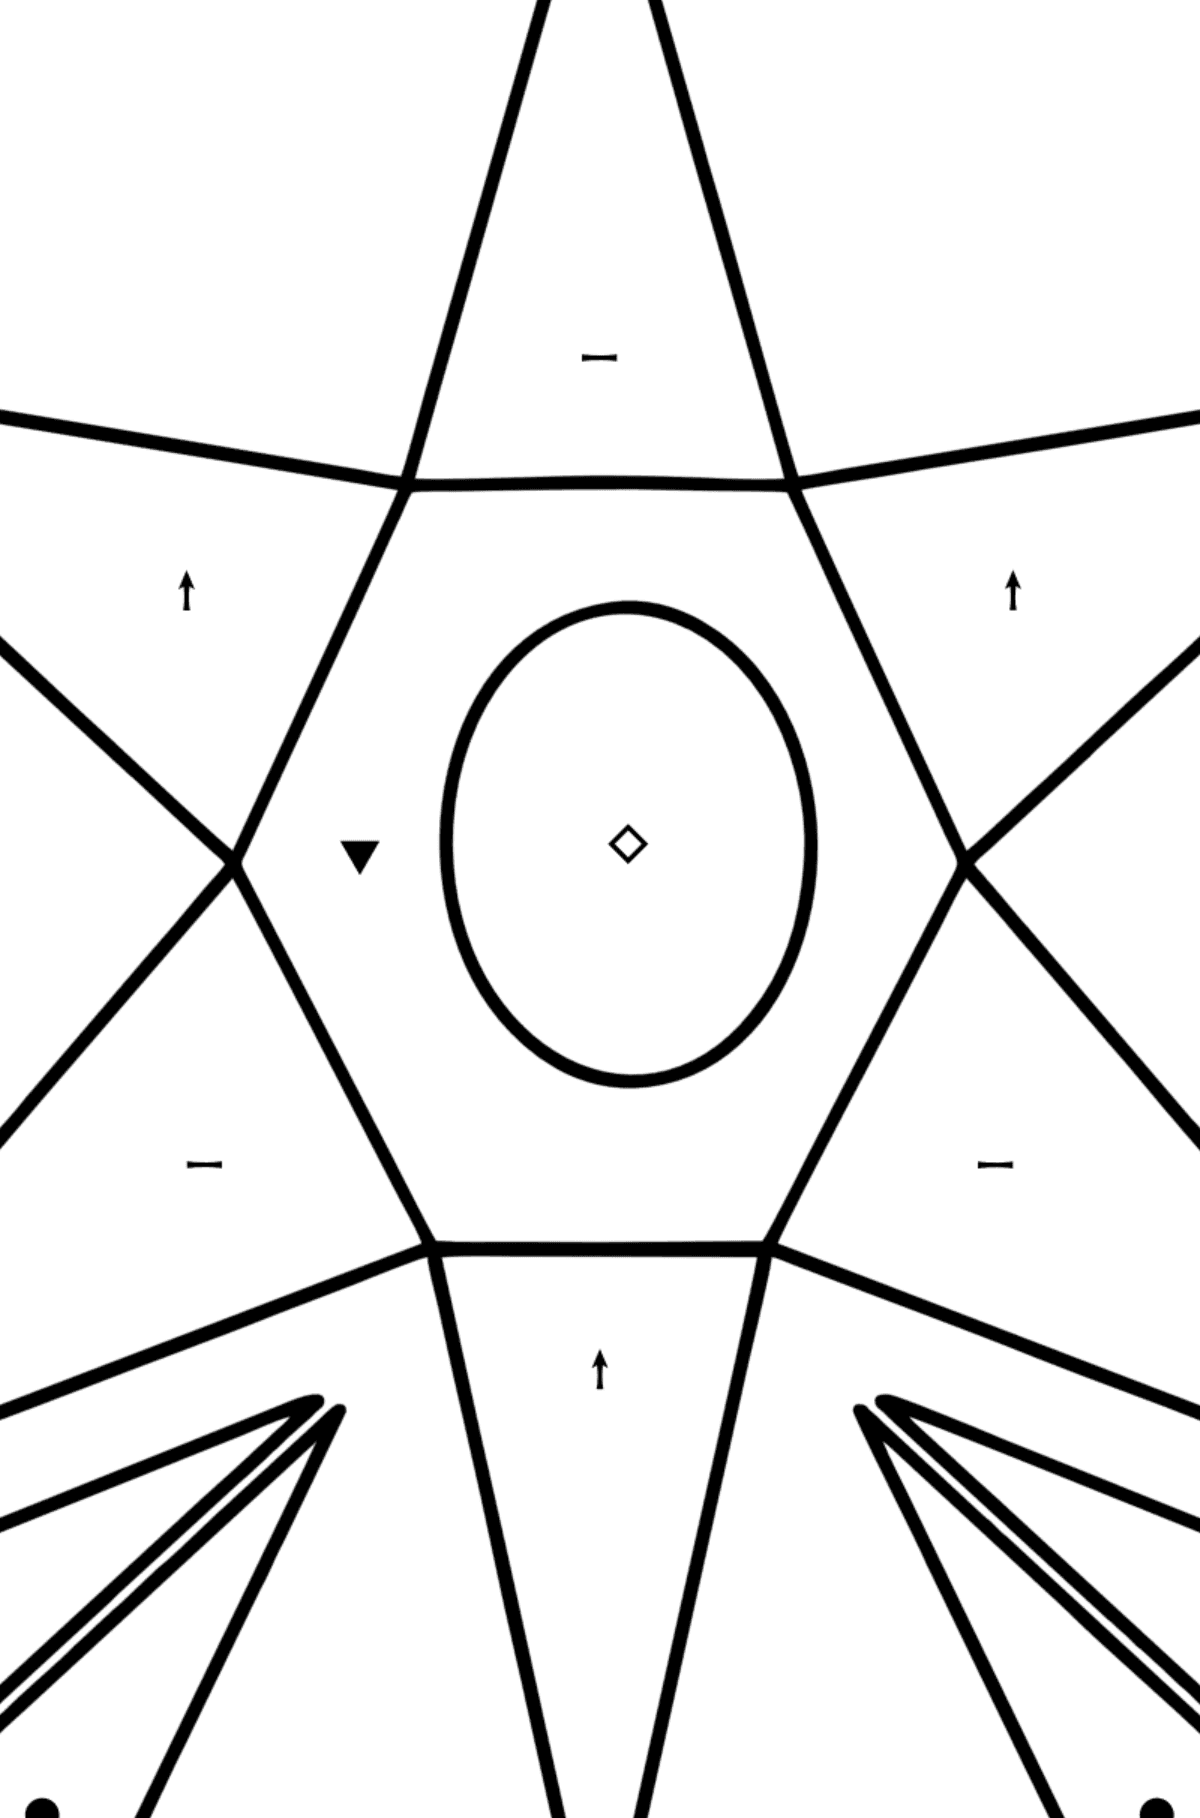 Coloring page - aster from geometric shapes - Coloring by Symbols for Kids